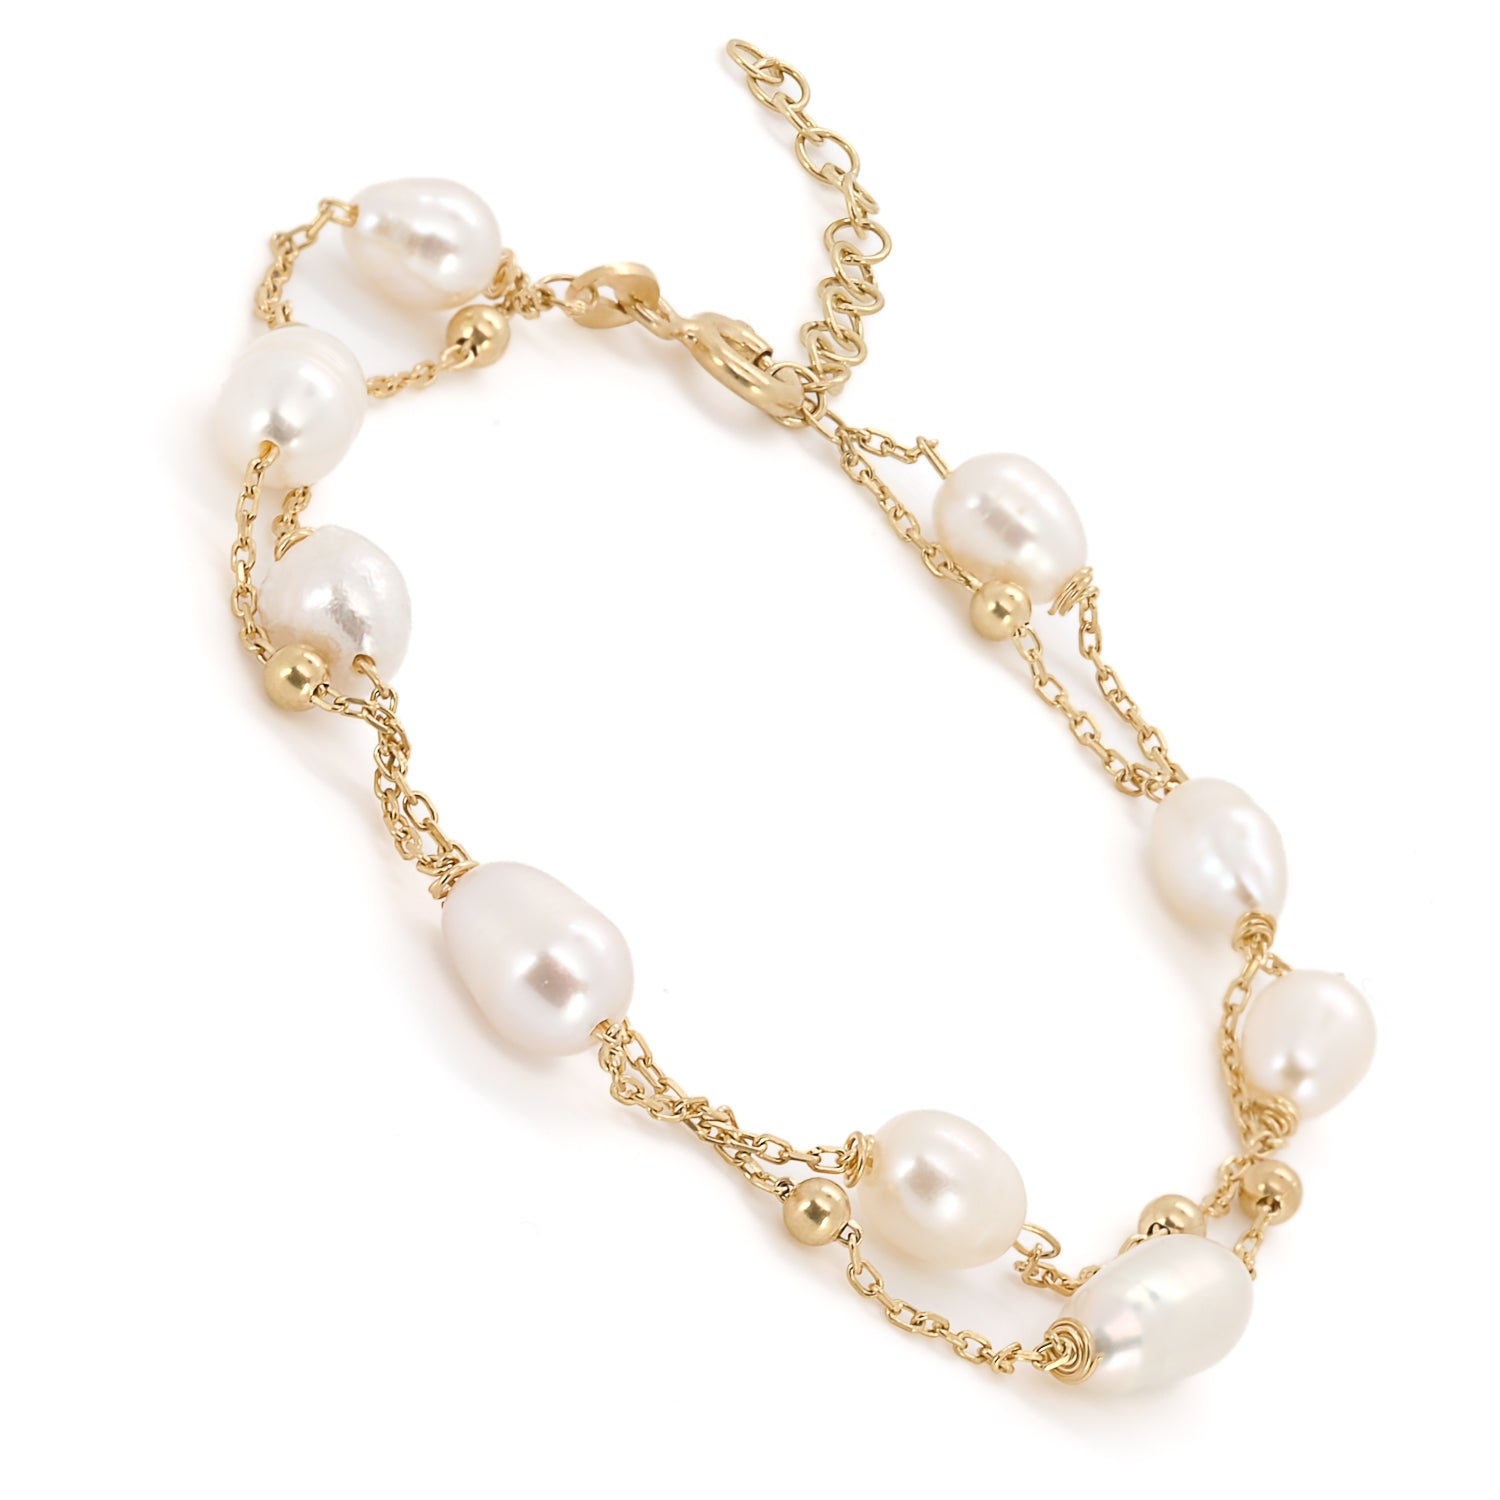 Ethereal glow: Pearl Gold Chain Bracelet captivates.